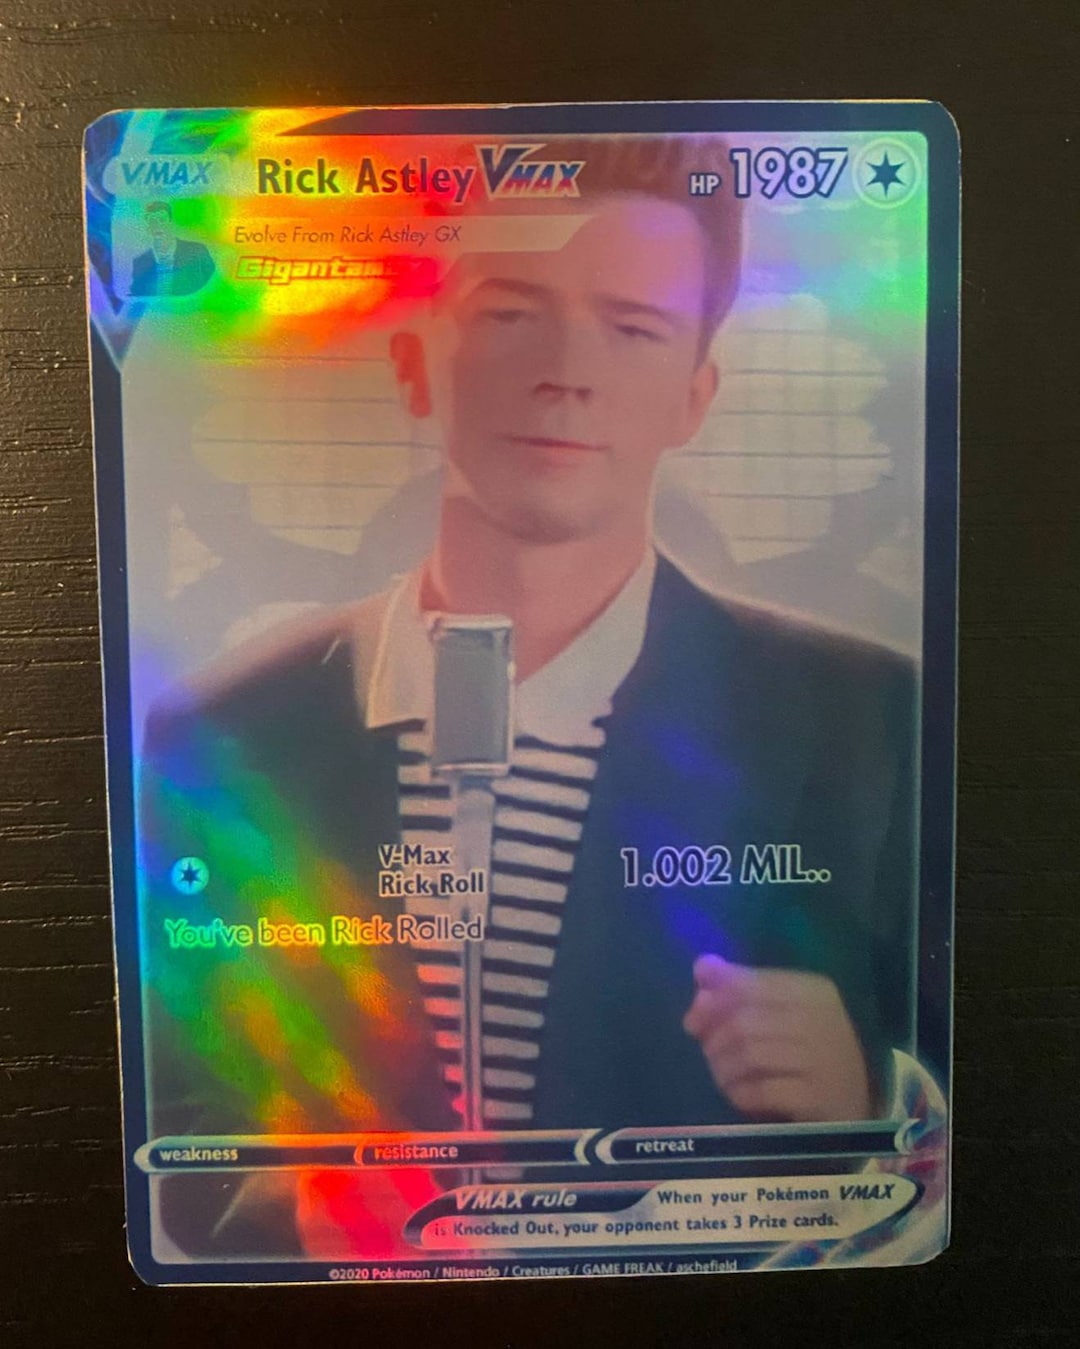 You're Rickrolled!, 